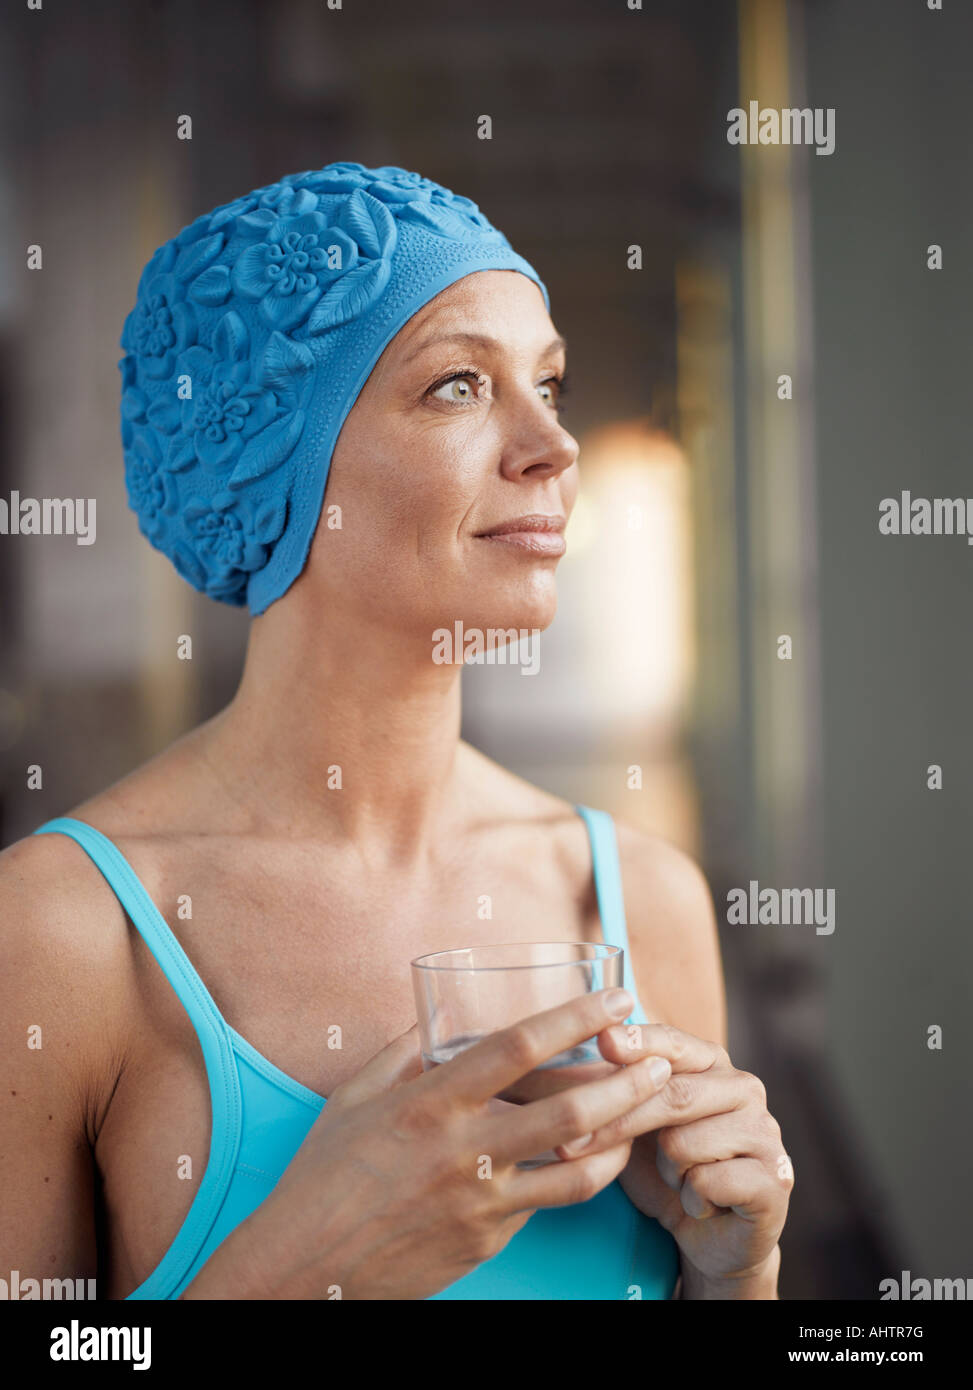 Mature woman wearing bathing suit, holding glass of water Stock Photo